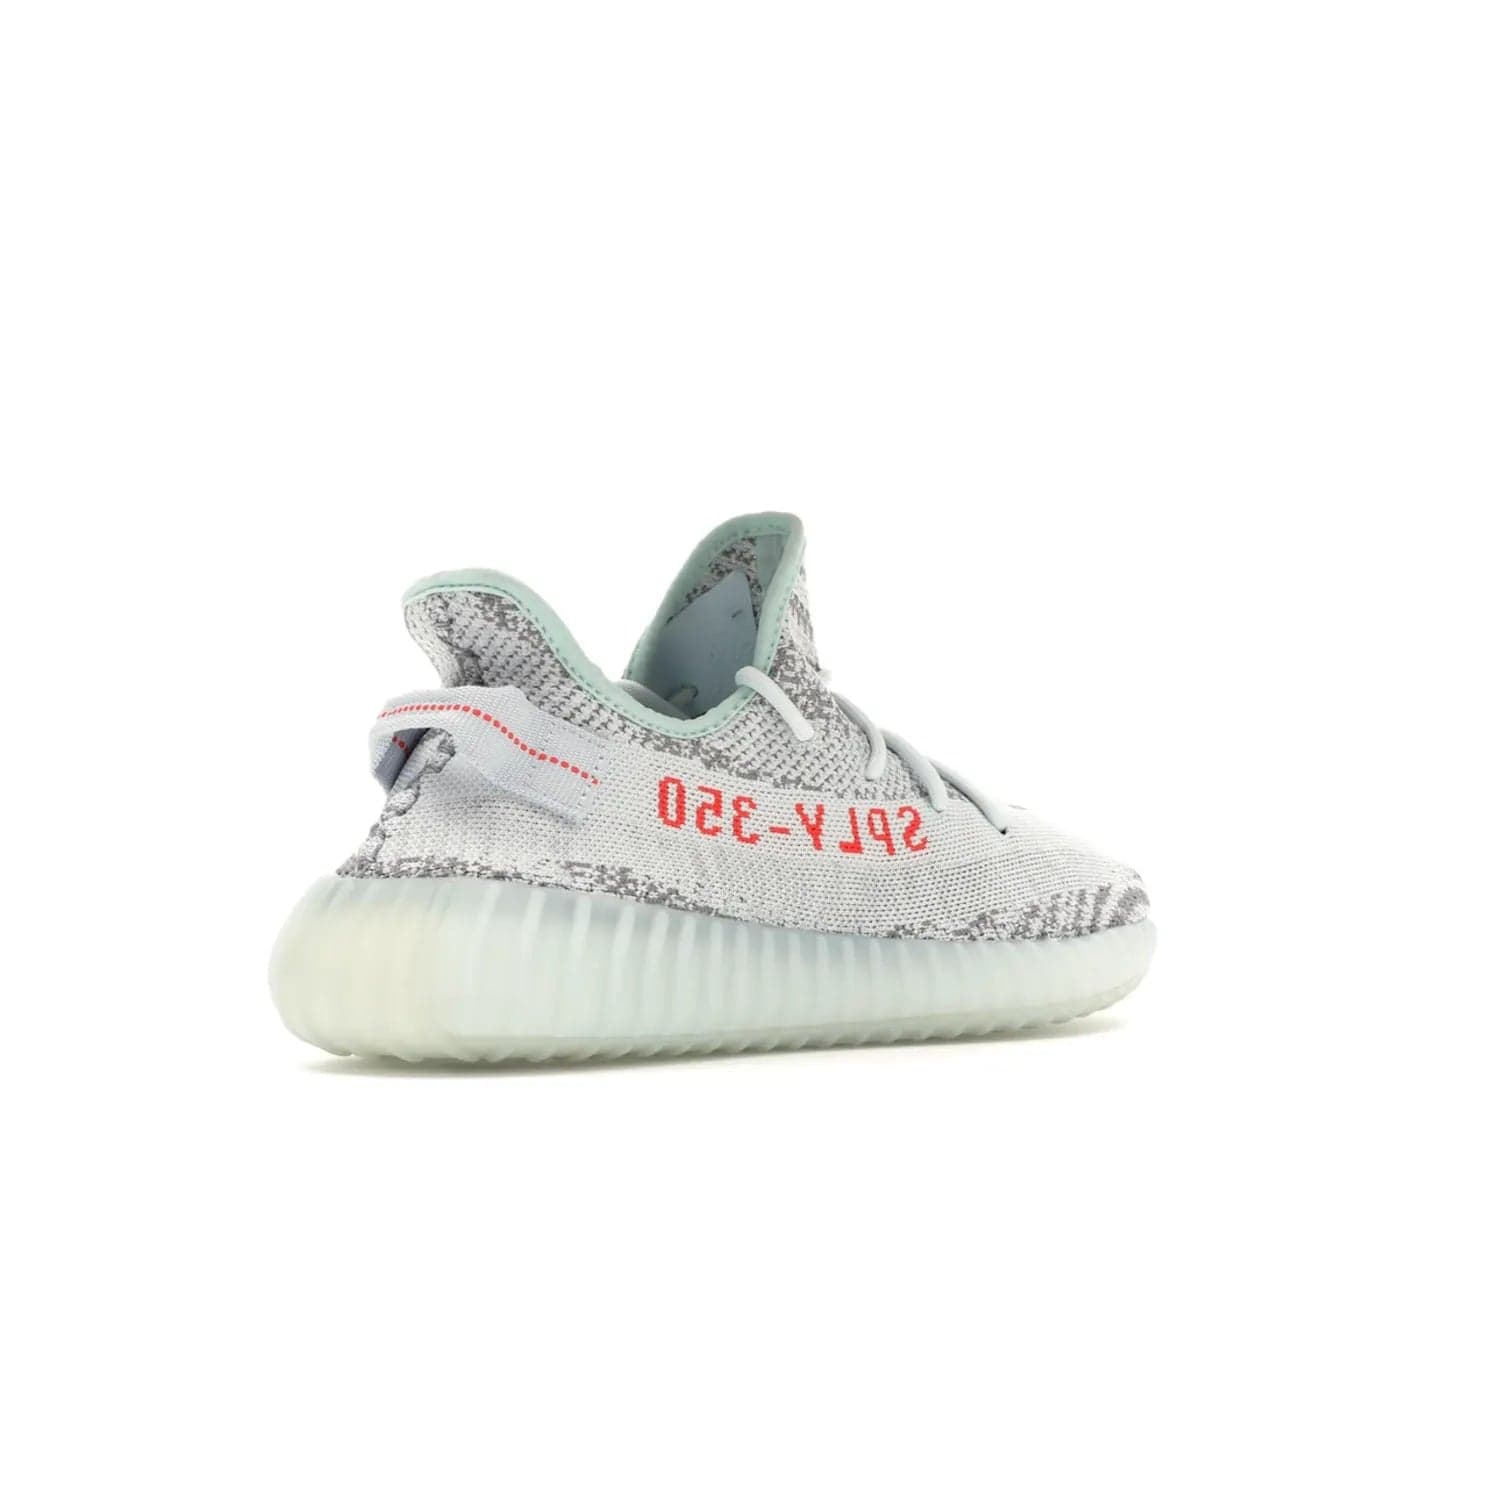 adidas Yeezy Boost 350 V2 Blue Tint - Image 33 - Only at www.BallersClubKickz.com - The adidas Yeezy Boost 350 V2 Blue Tint merges fashion and functionality with its Primeknit upper and Boost sole. Released in December 2017, this luxurious sneaker is perfect for making a stylish statement.